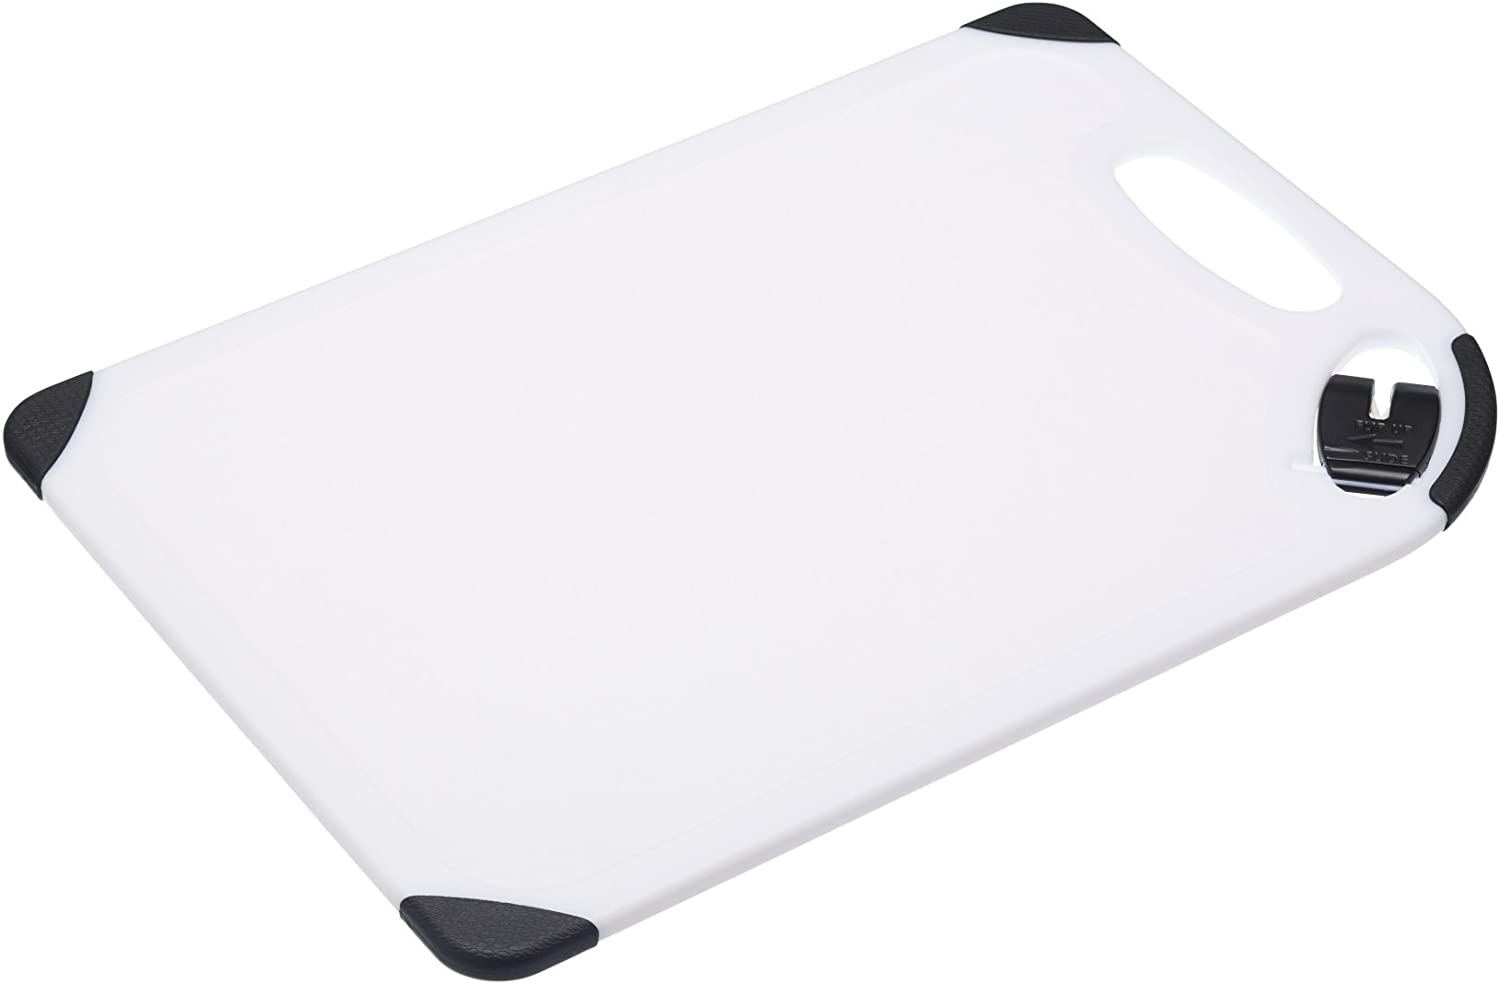 masterclass Master Class Chopping Board with Knife Sharpener 17 x 35 x 25 cm in White, Mix of Multiple Materials, 12 x 17 x 22 cm